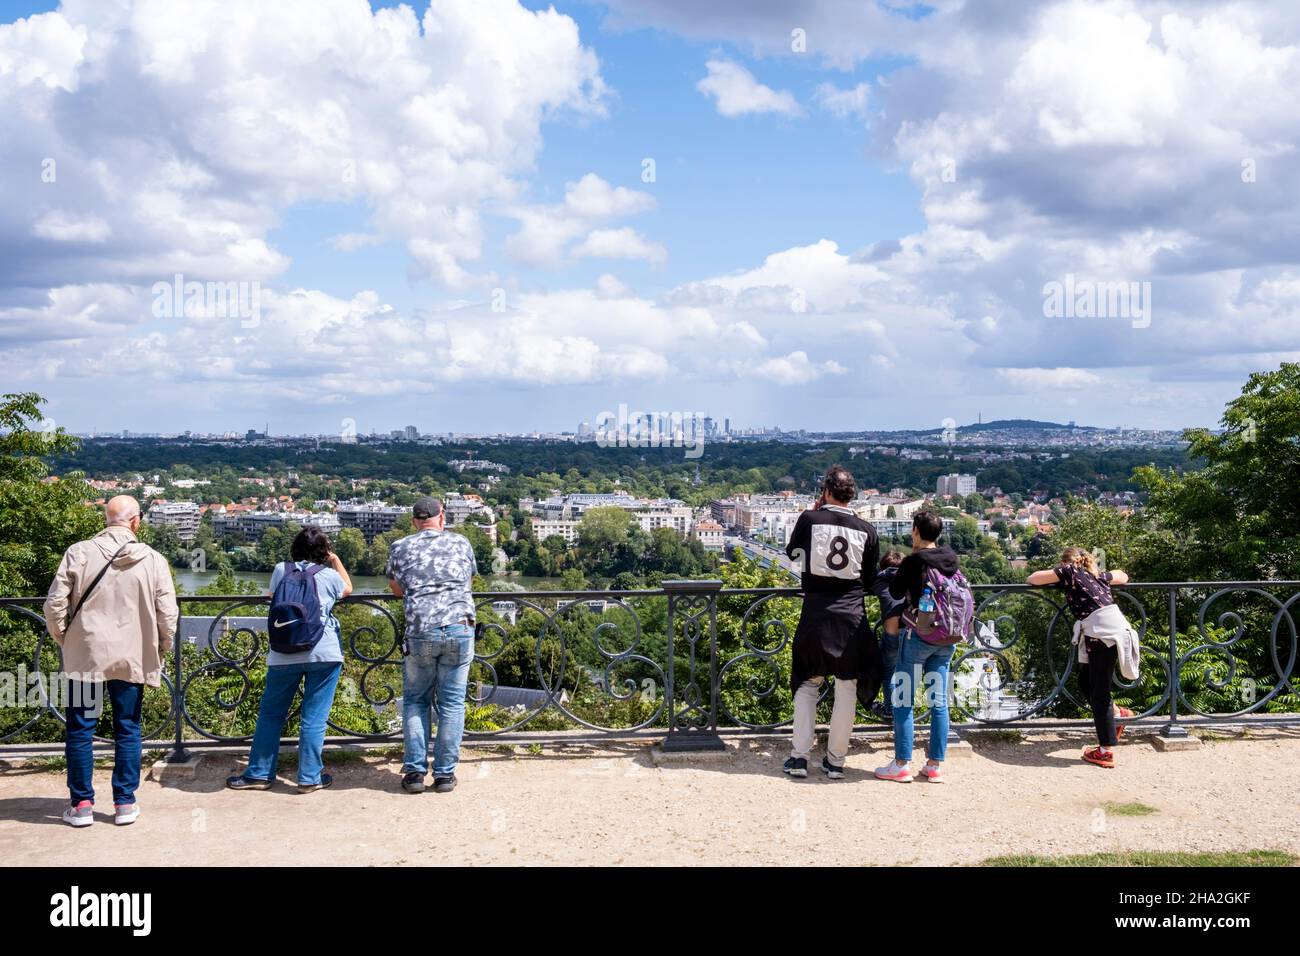 Saint-Germain-en-Laye (Paris area): panoramic view of the district of La Defense and the city of Paris from the terraces of the former royal palace “C Stock Photo